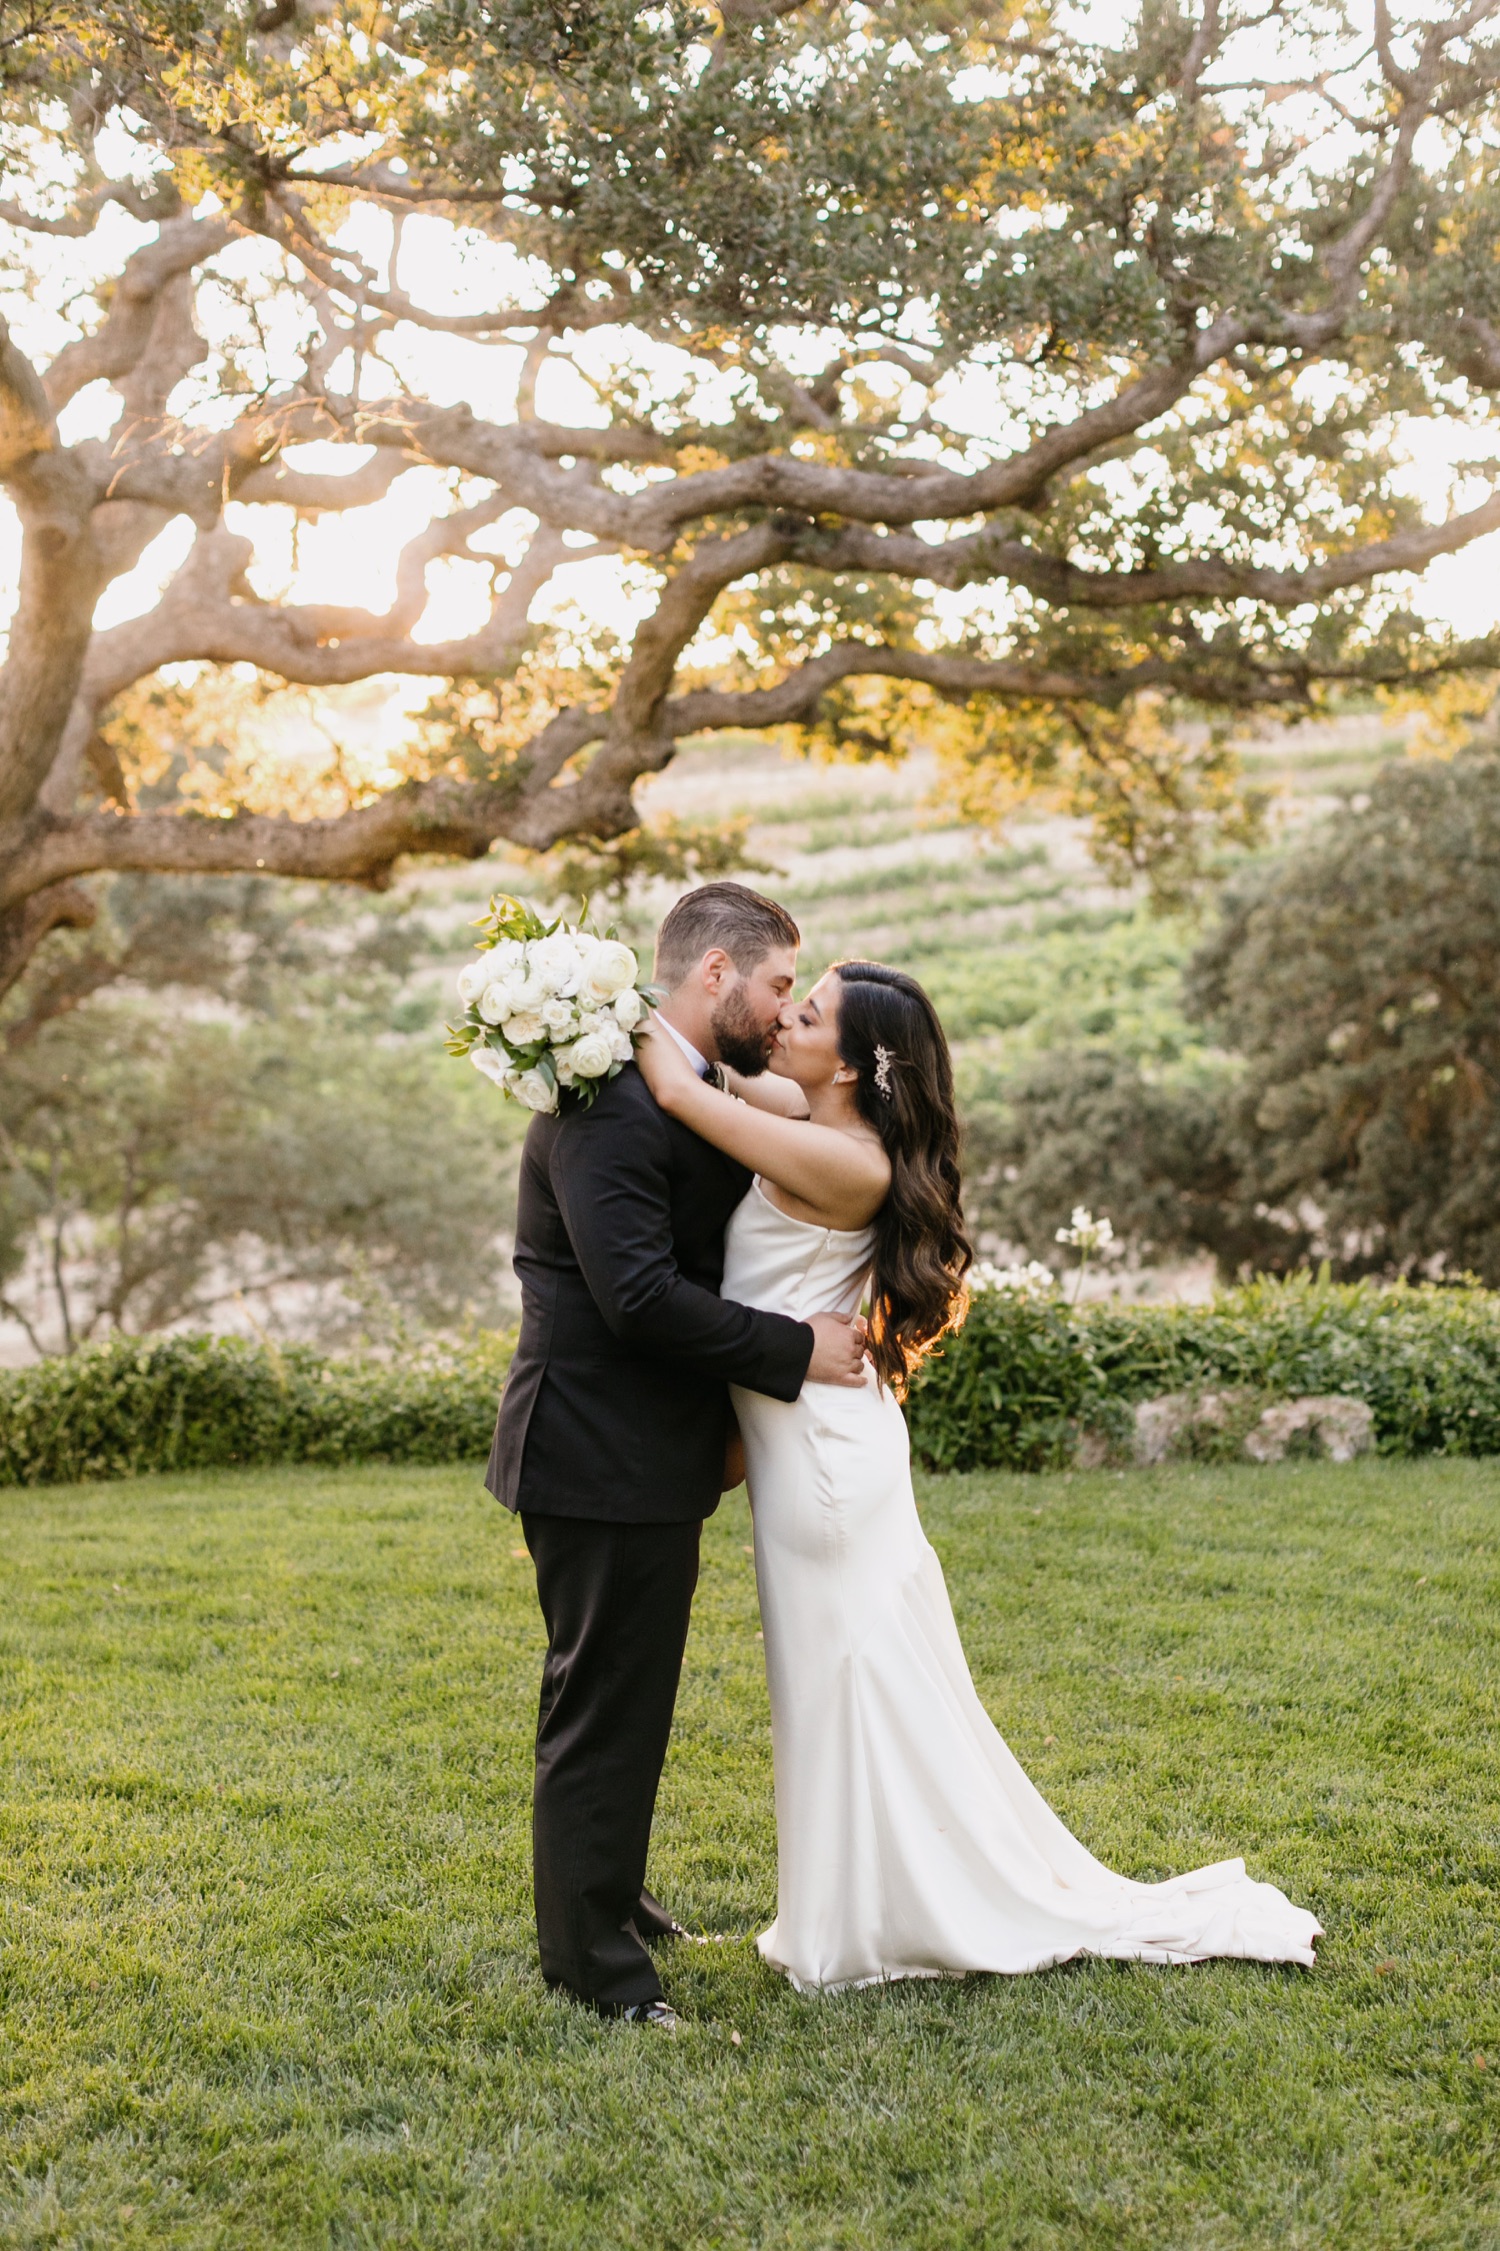 Bride and groom kissing during sunset photos at Villa San Juliette winery